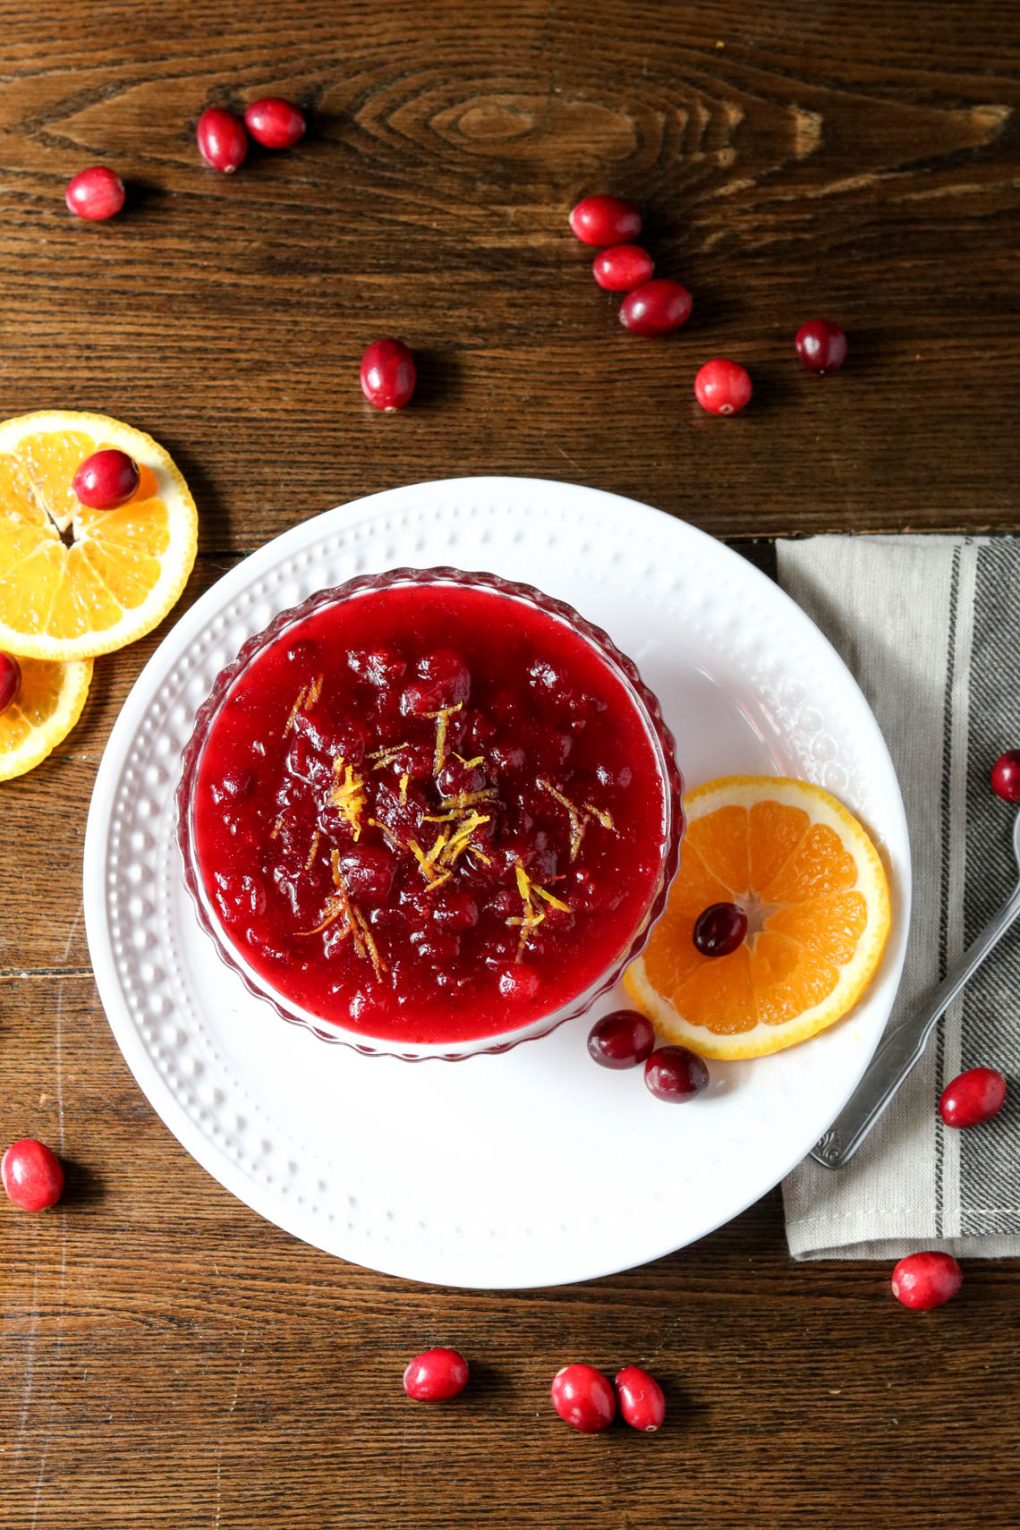 a bowl of orange cranberry sauce garnished with fresh cranberries and orange slices